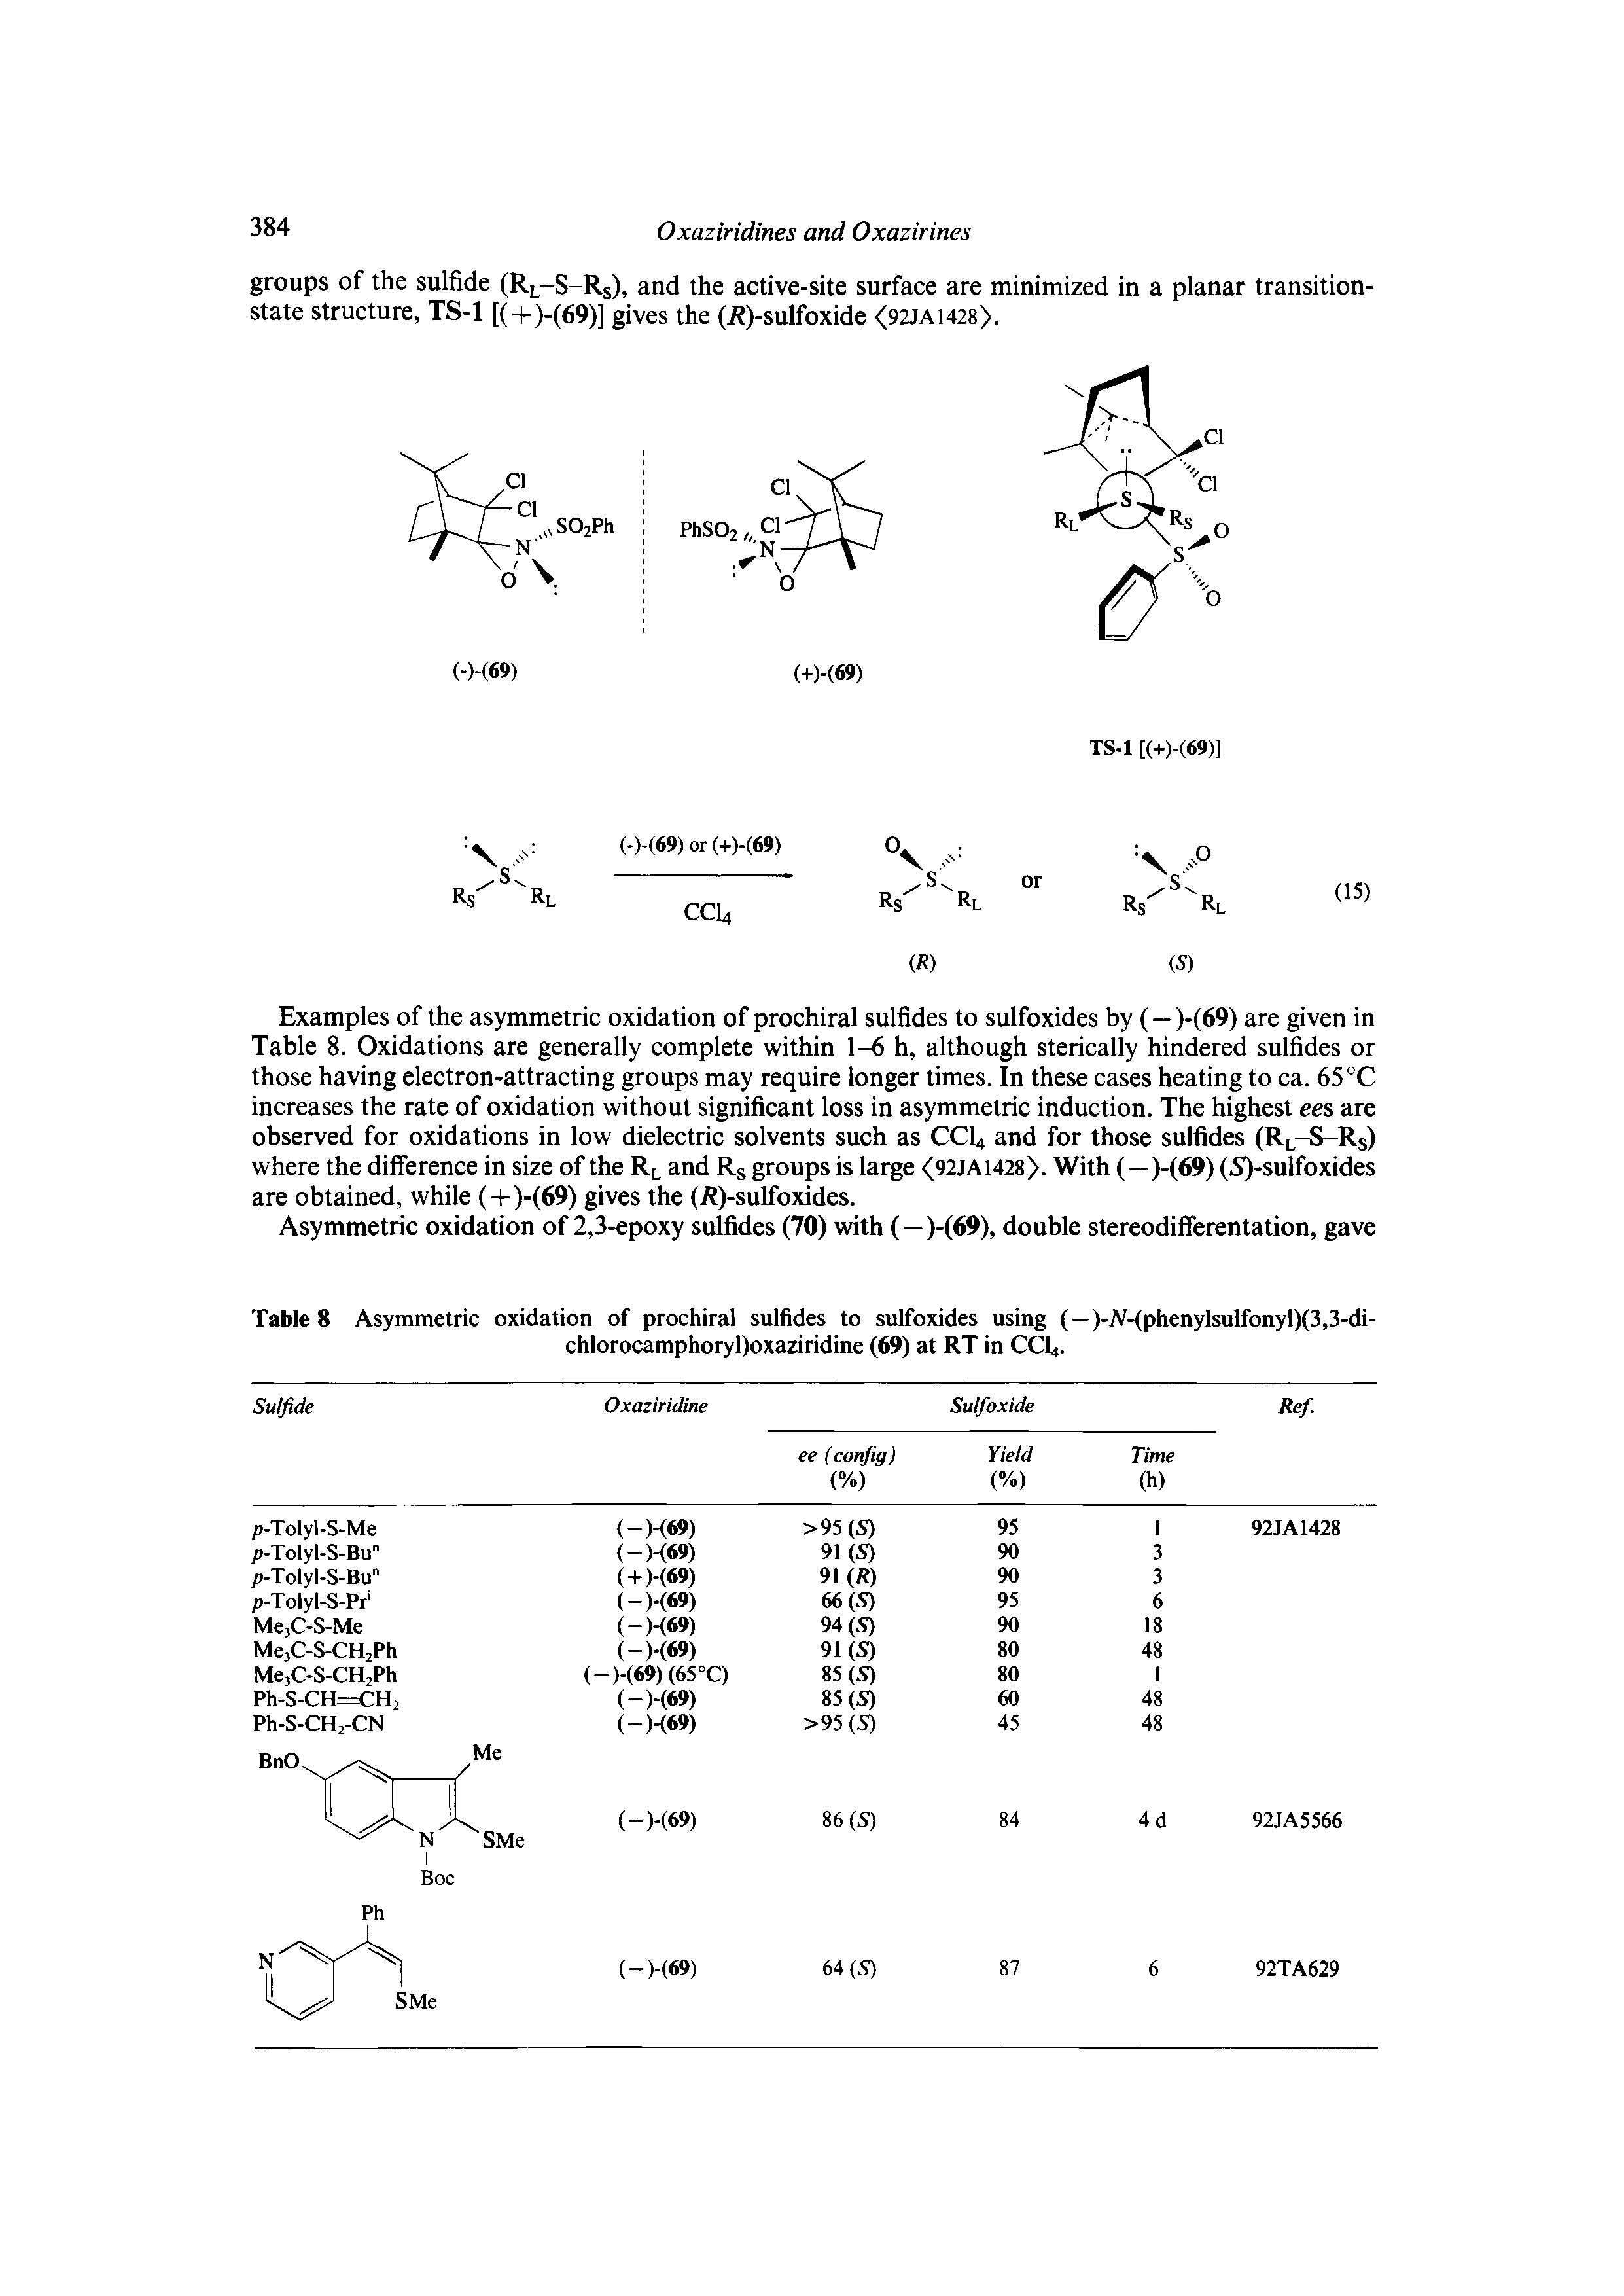 Table 8 Asymmetric oxidation of prochiral sulfides to sulfoxides using (—)-AT-(phenylsulfonyl)(3,3-di-...